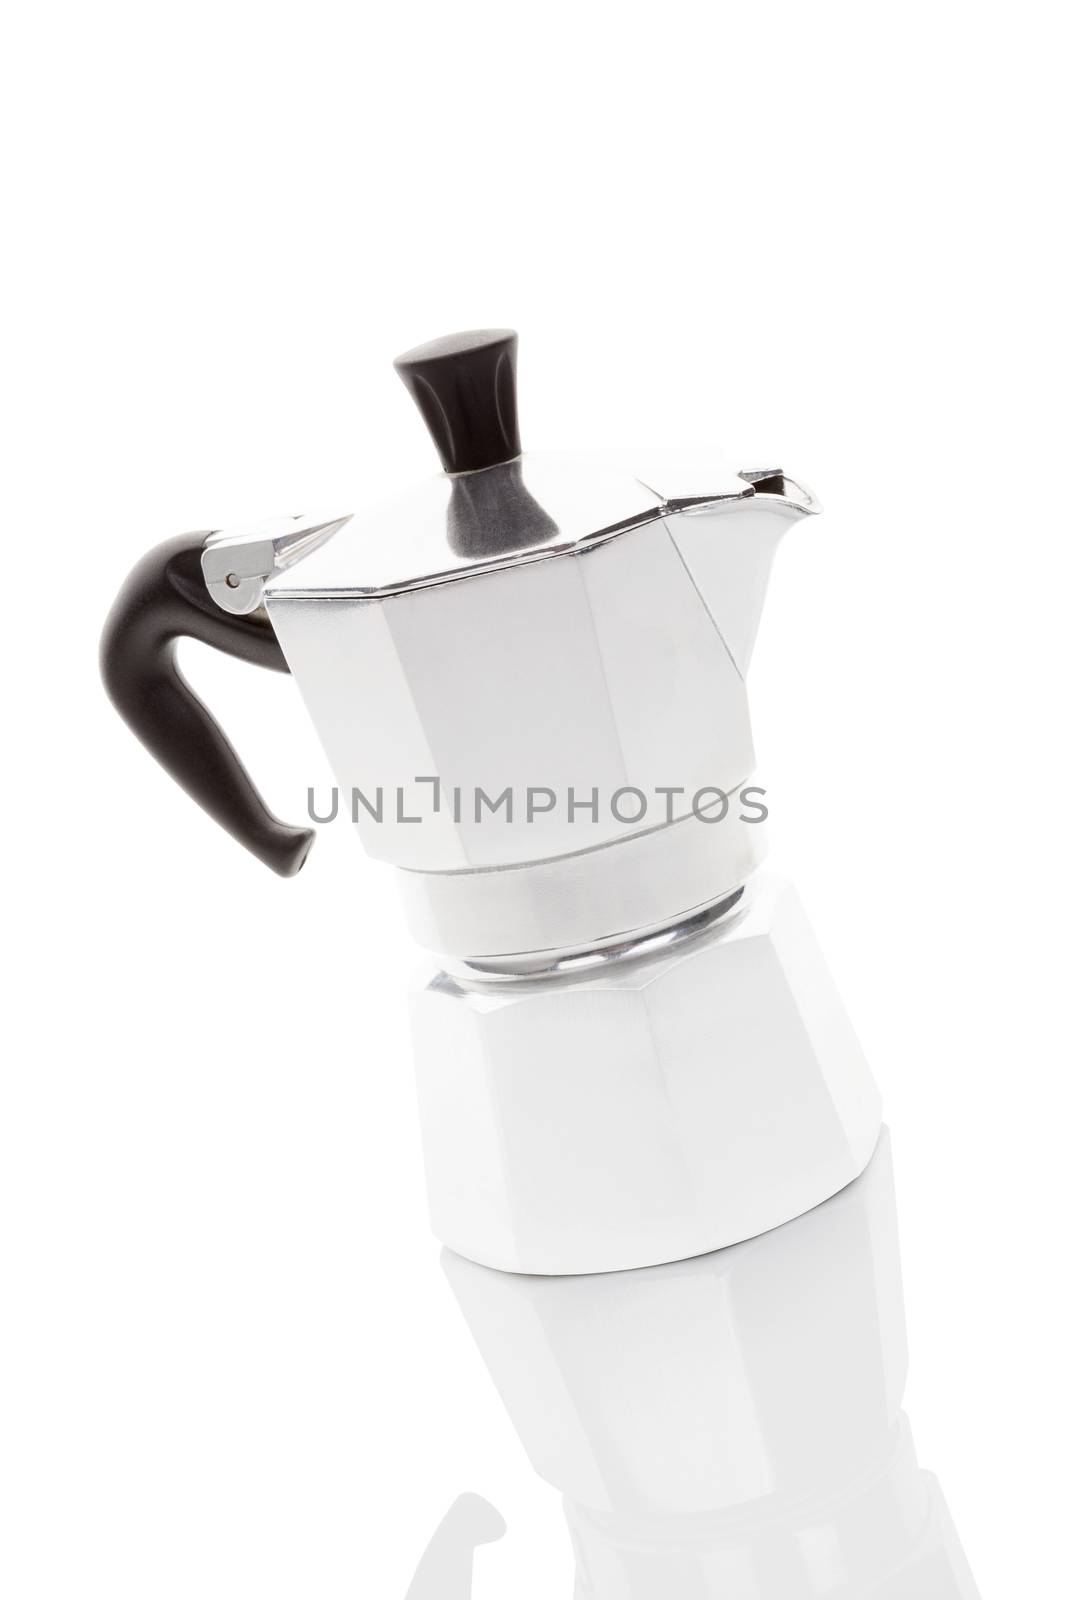 New shiny moca pot isolated on white background with reflection. Traditional italian coffee machine.